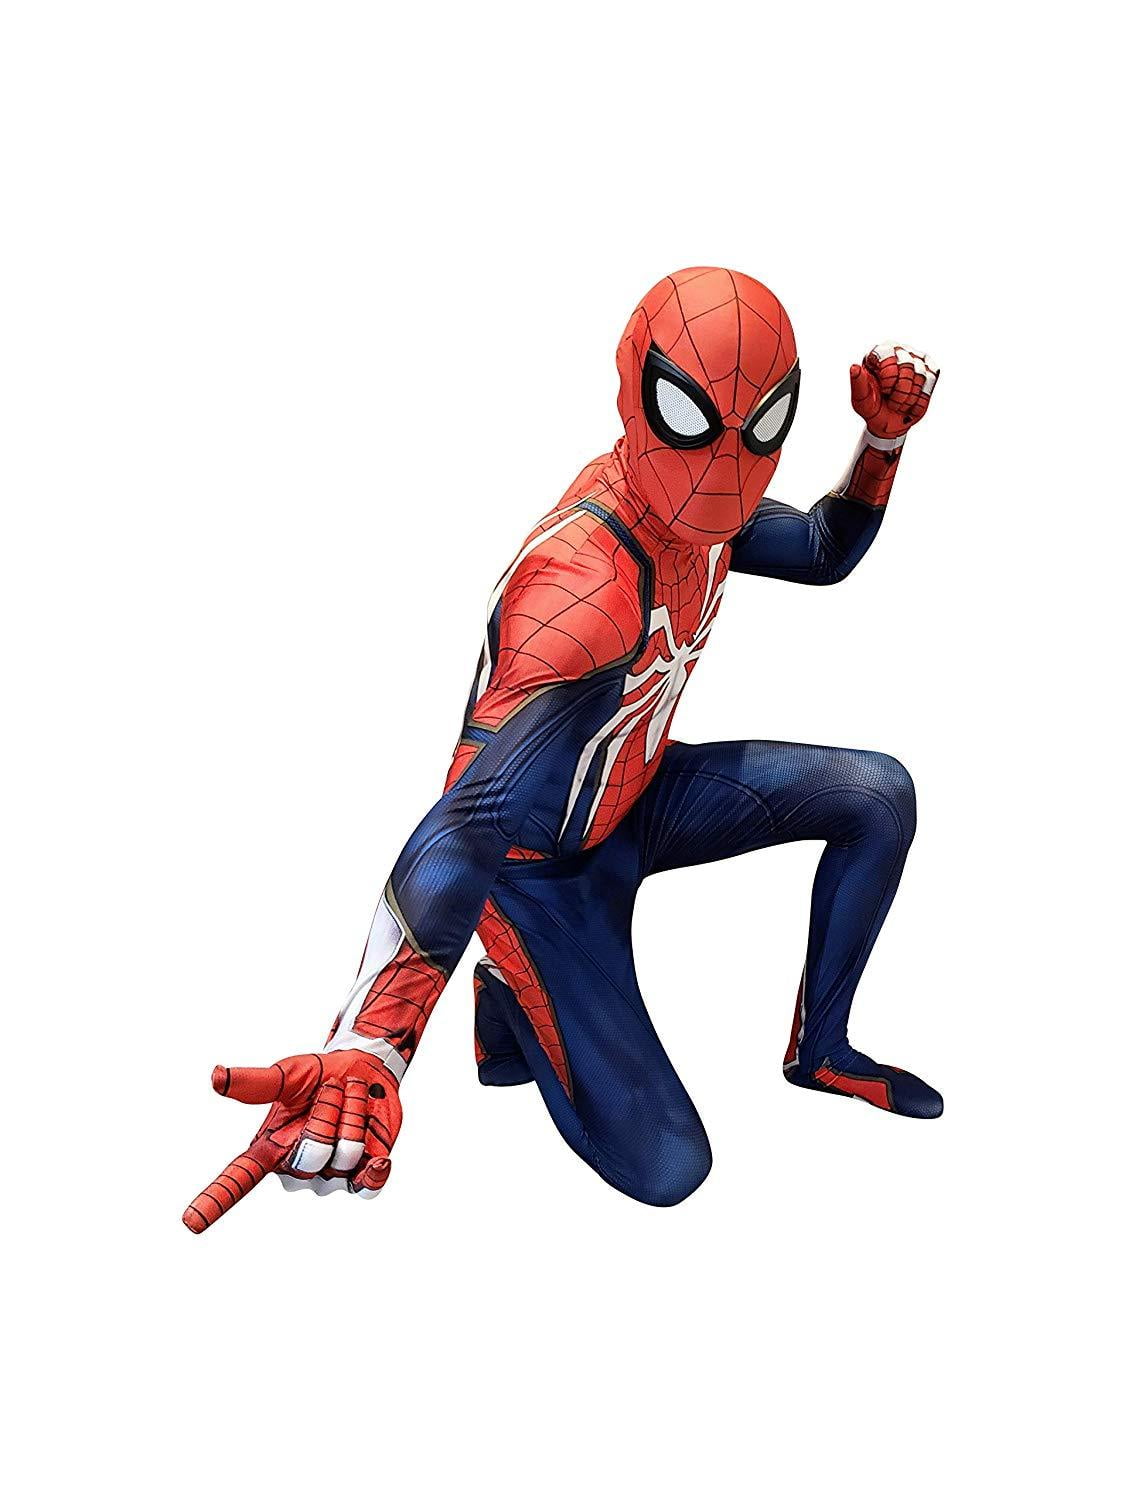 Spider-Man PS4 Outfits Jumpsuit Costume Cosplay Halloween 